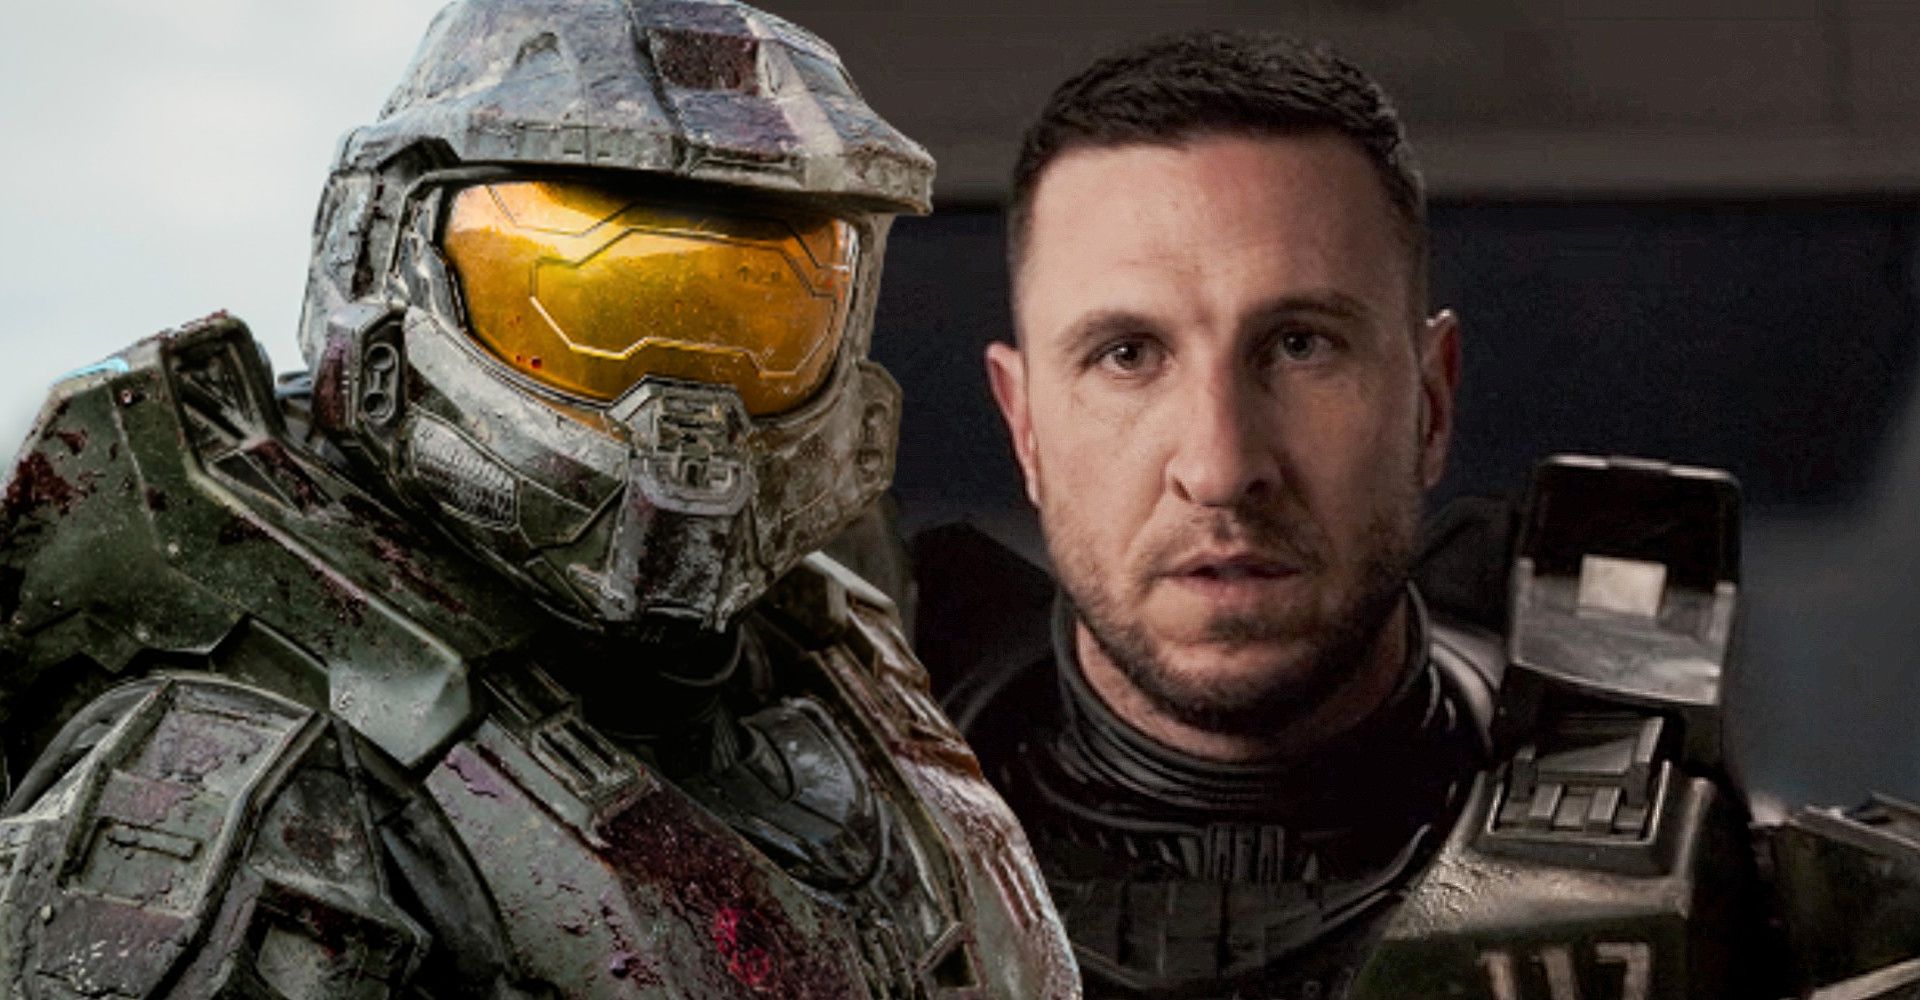 Master-Chief-in-the-Halo-tv-series-with-his-helmet-on-and-GamersRD